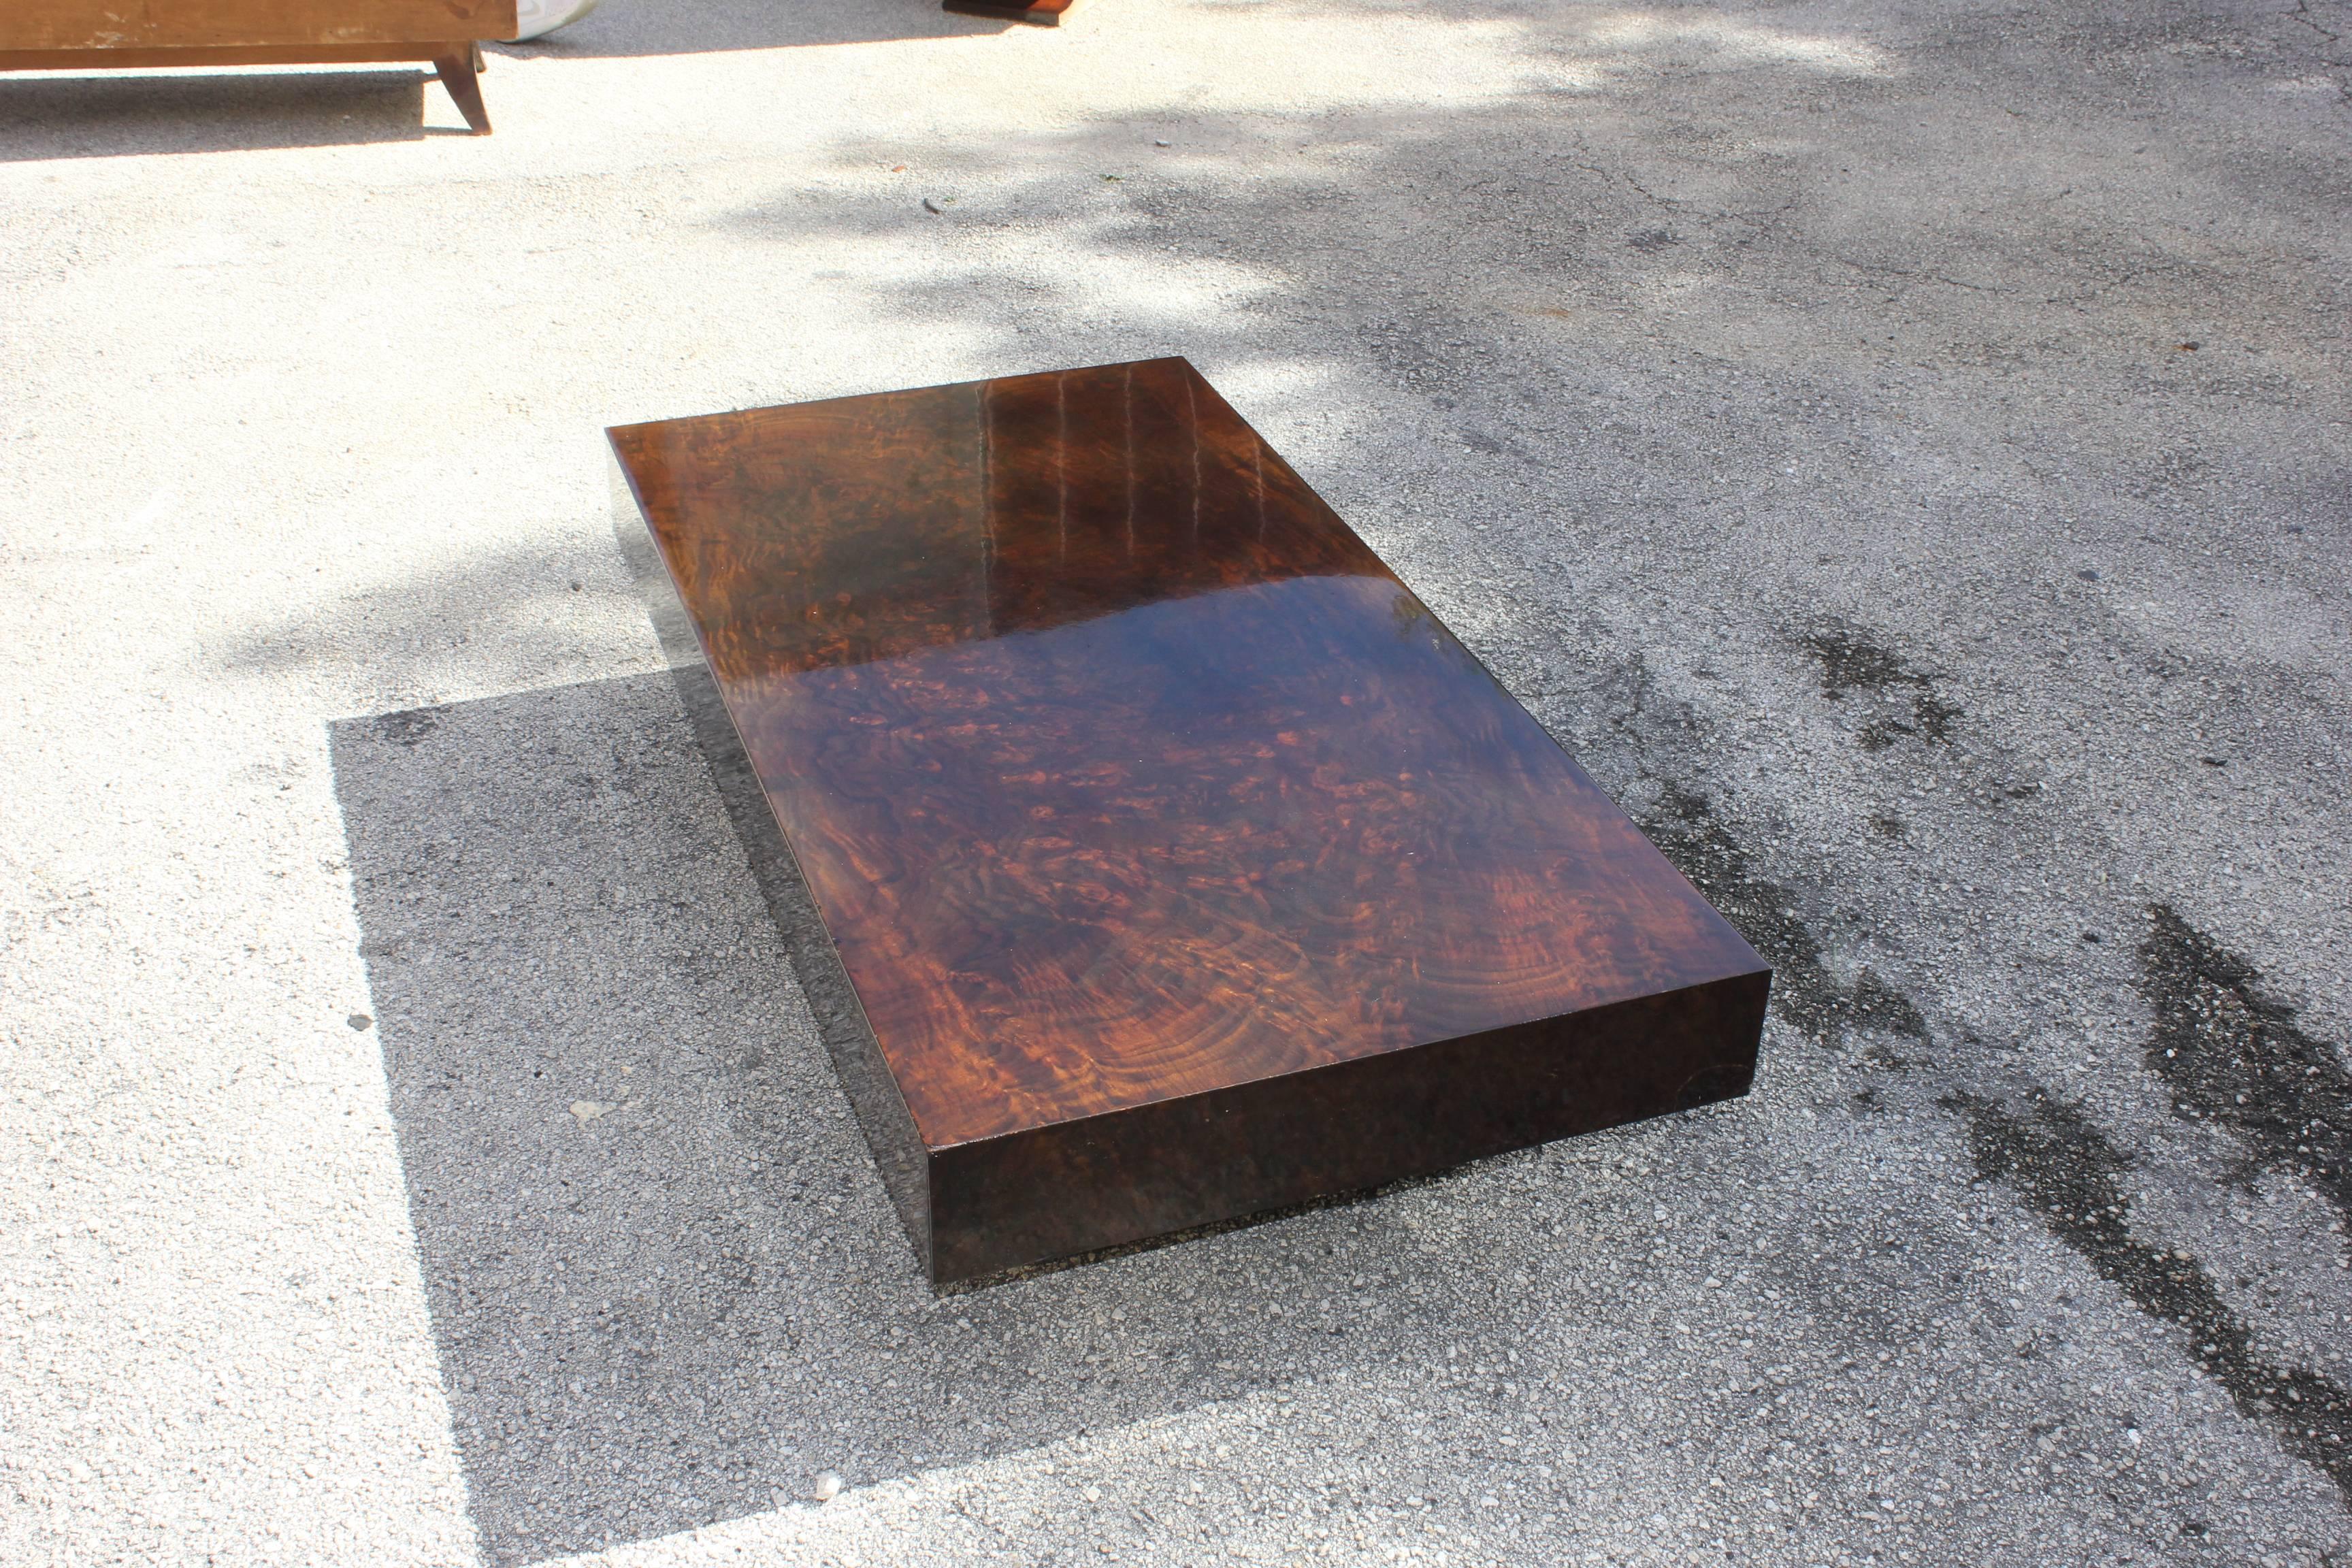 This French Art Deco period coffee table, circa 1940. Burl walnut, makes it ideal next to a sofa or family room. A fine example of Classic, French Art Deco.